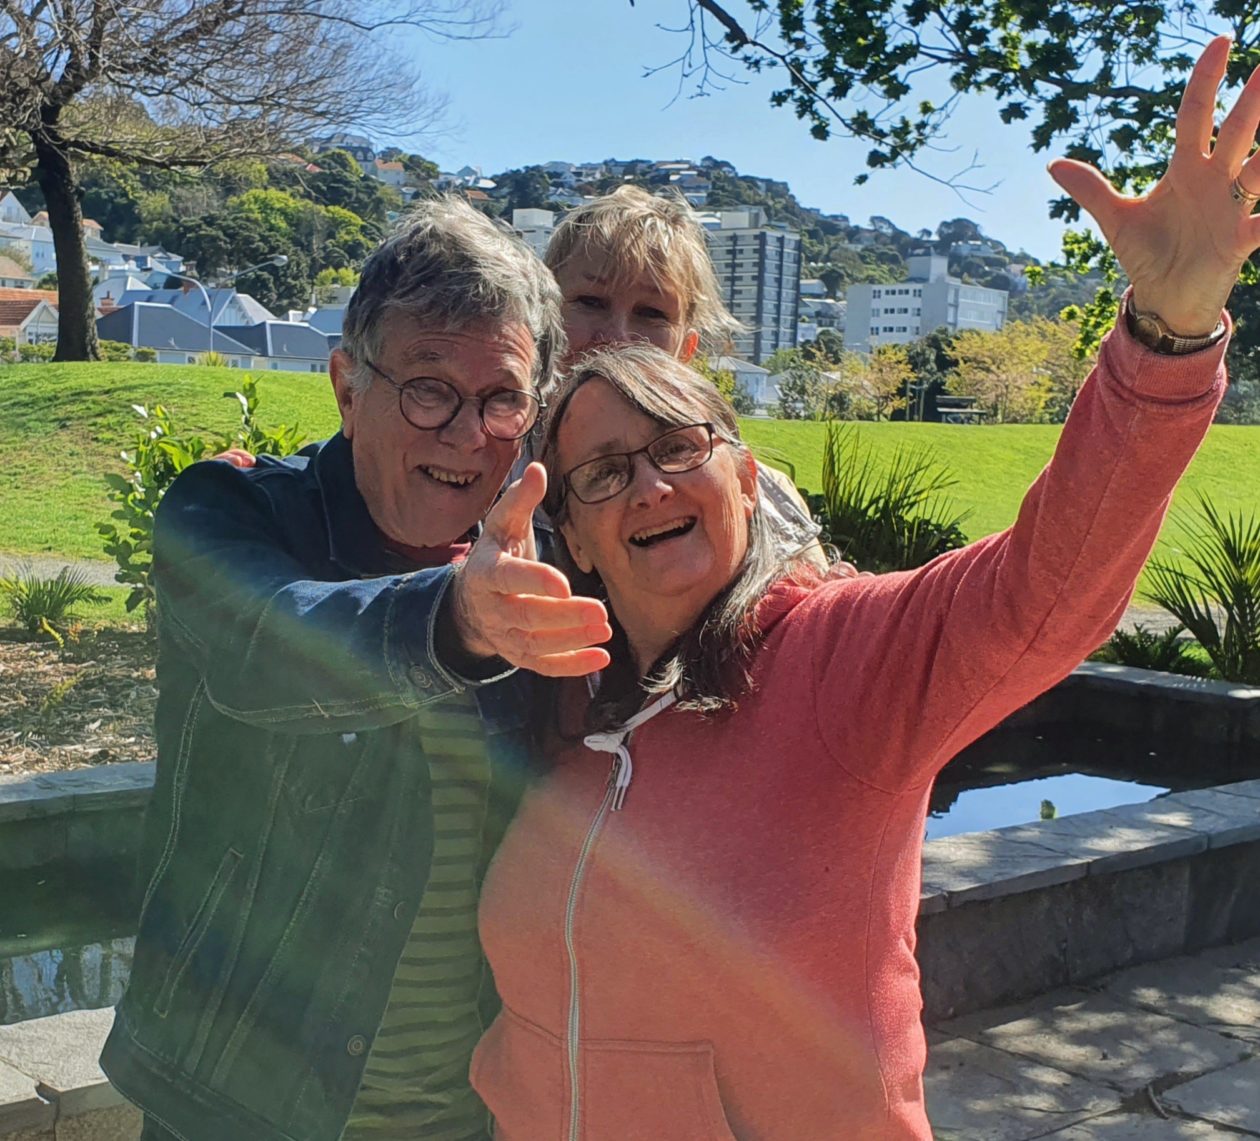 Three people from the Younger Onset Dementia Aotearoa Trust walking in the park